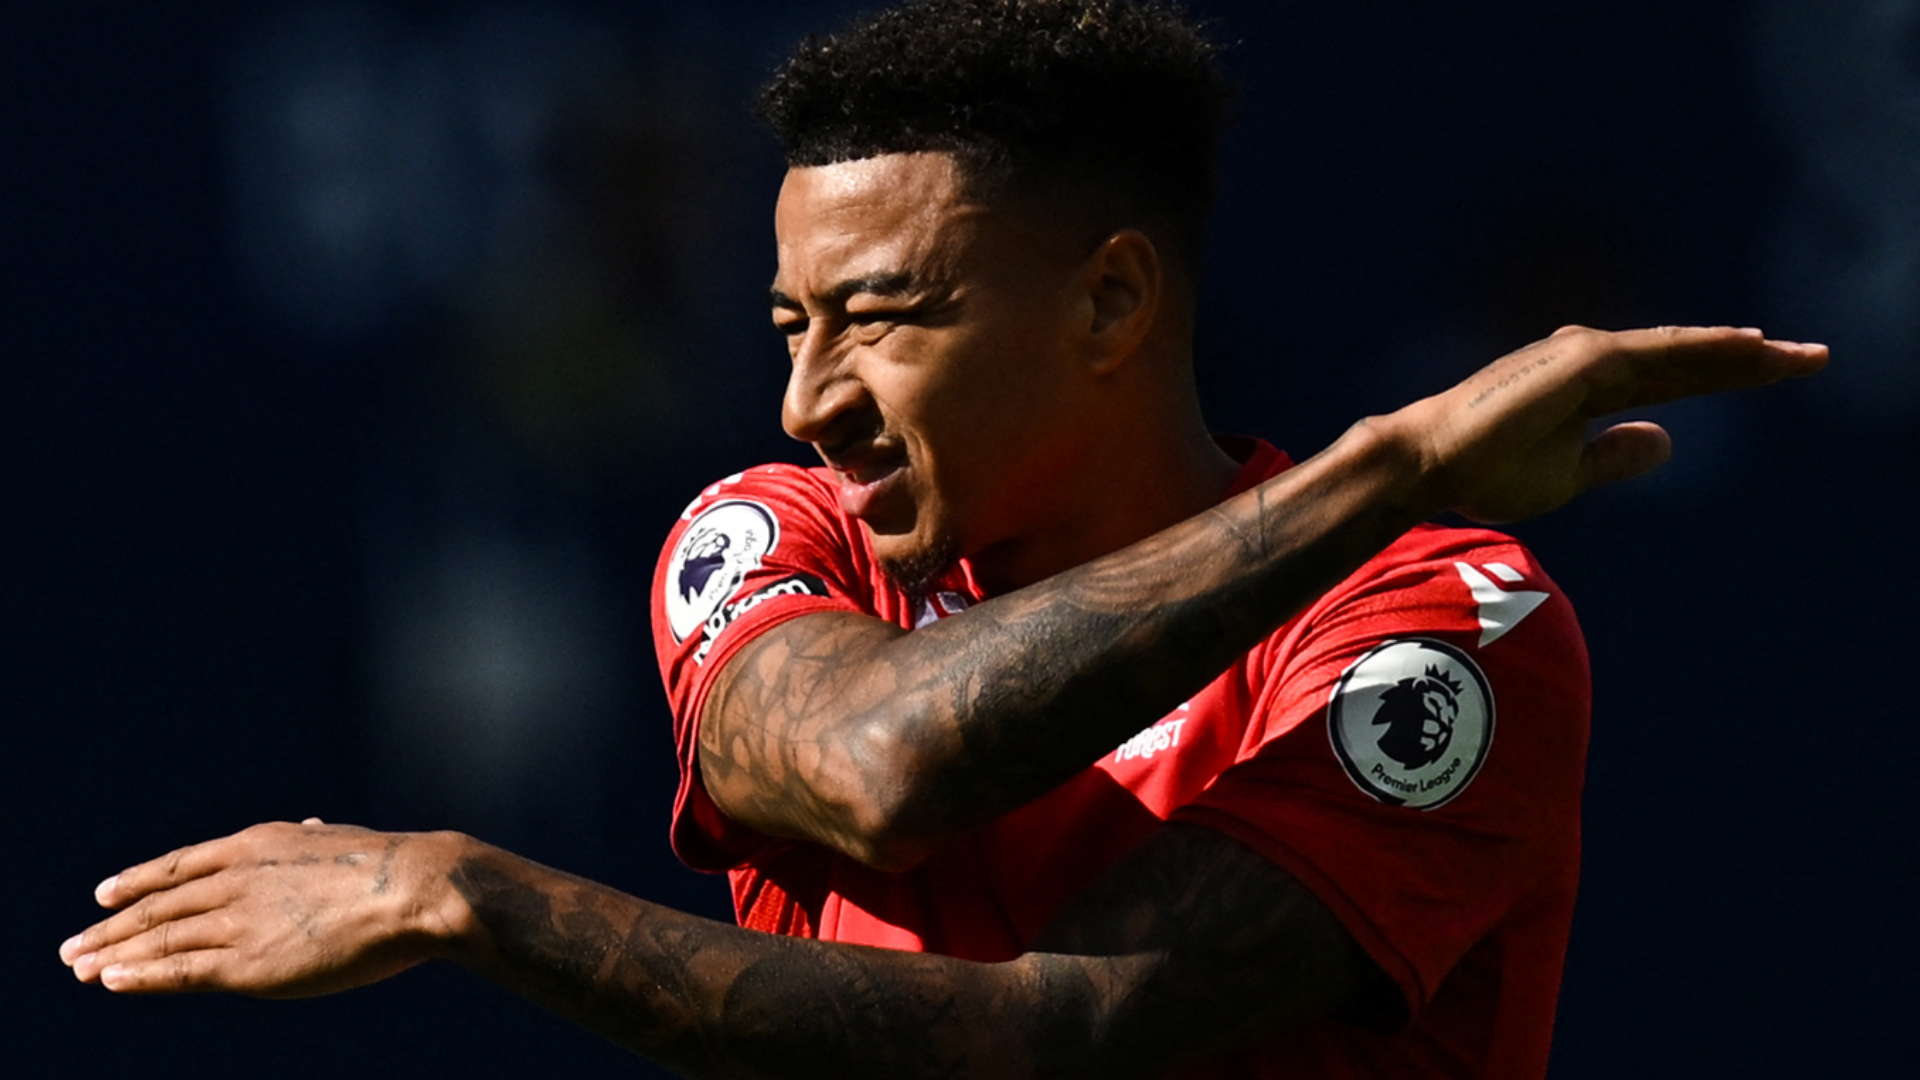 Revealed: Why West Ham didn’t sign Jesse Lingard on free transfer as former Man Utd man continues to train with Al-Ettifaq | Goal.com US